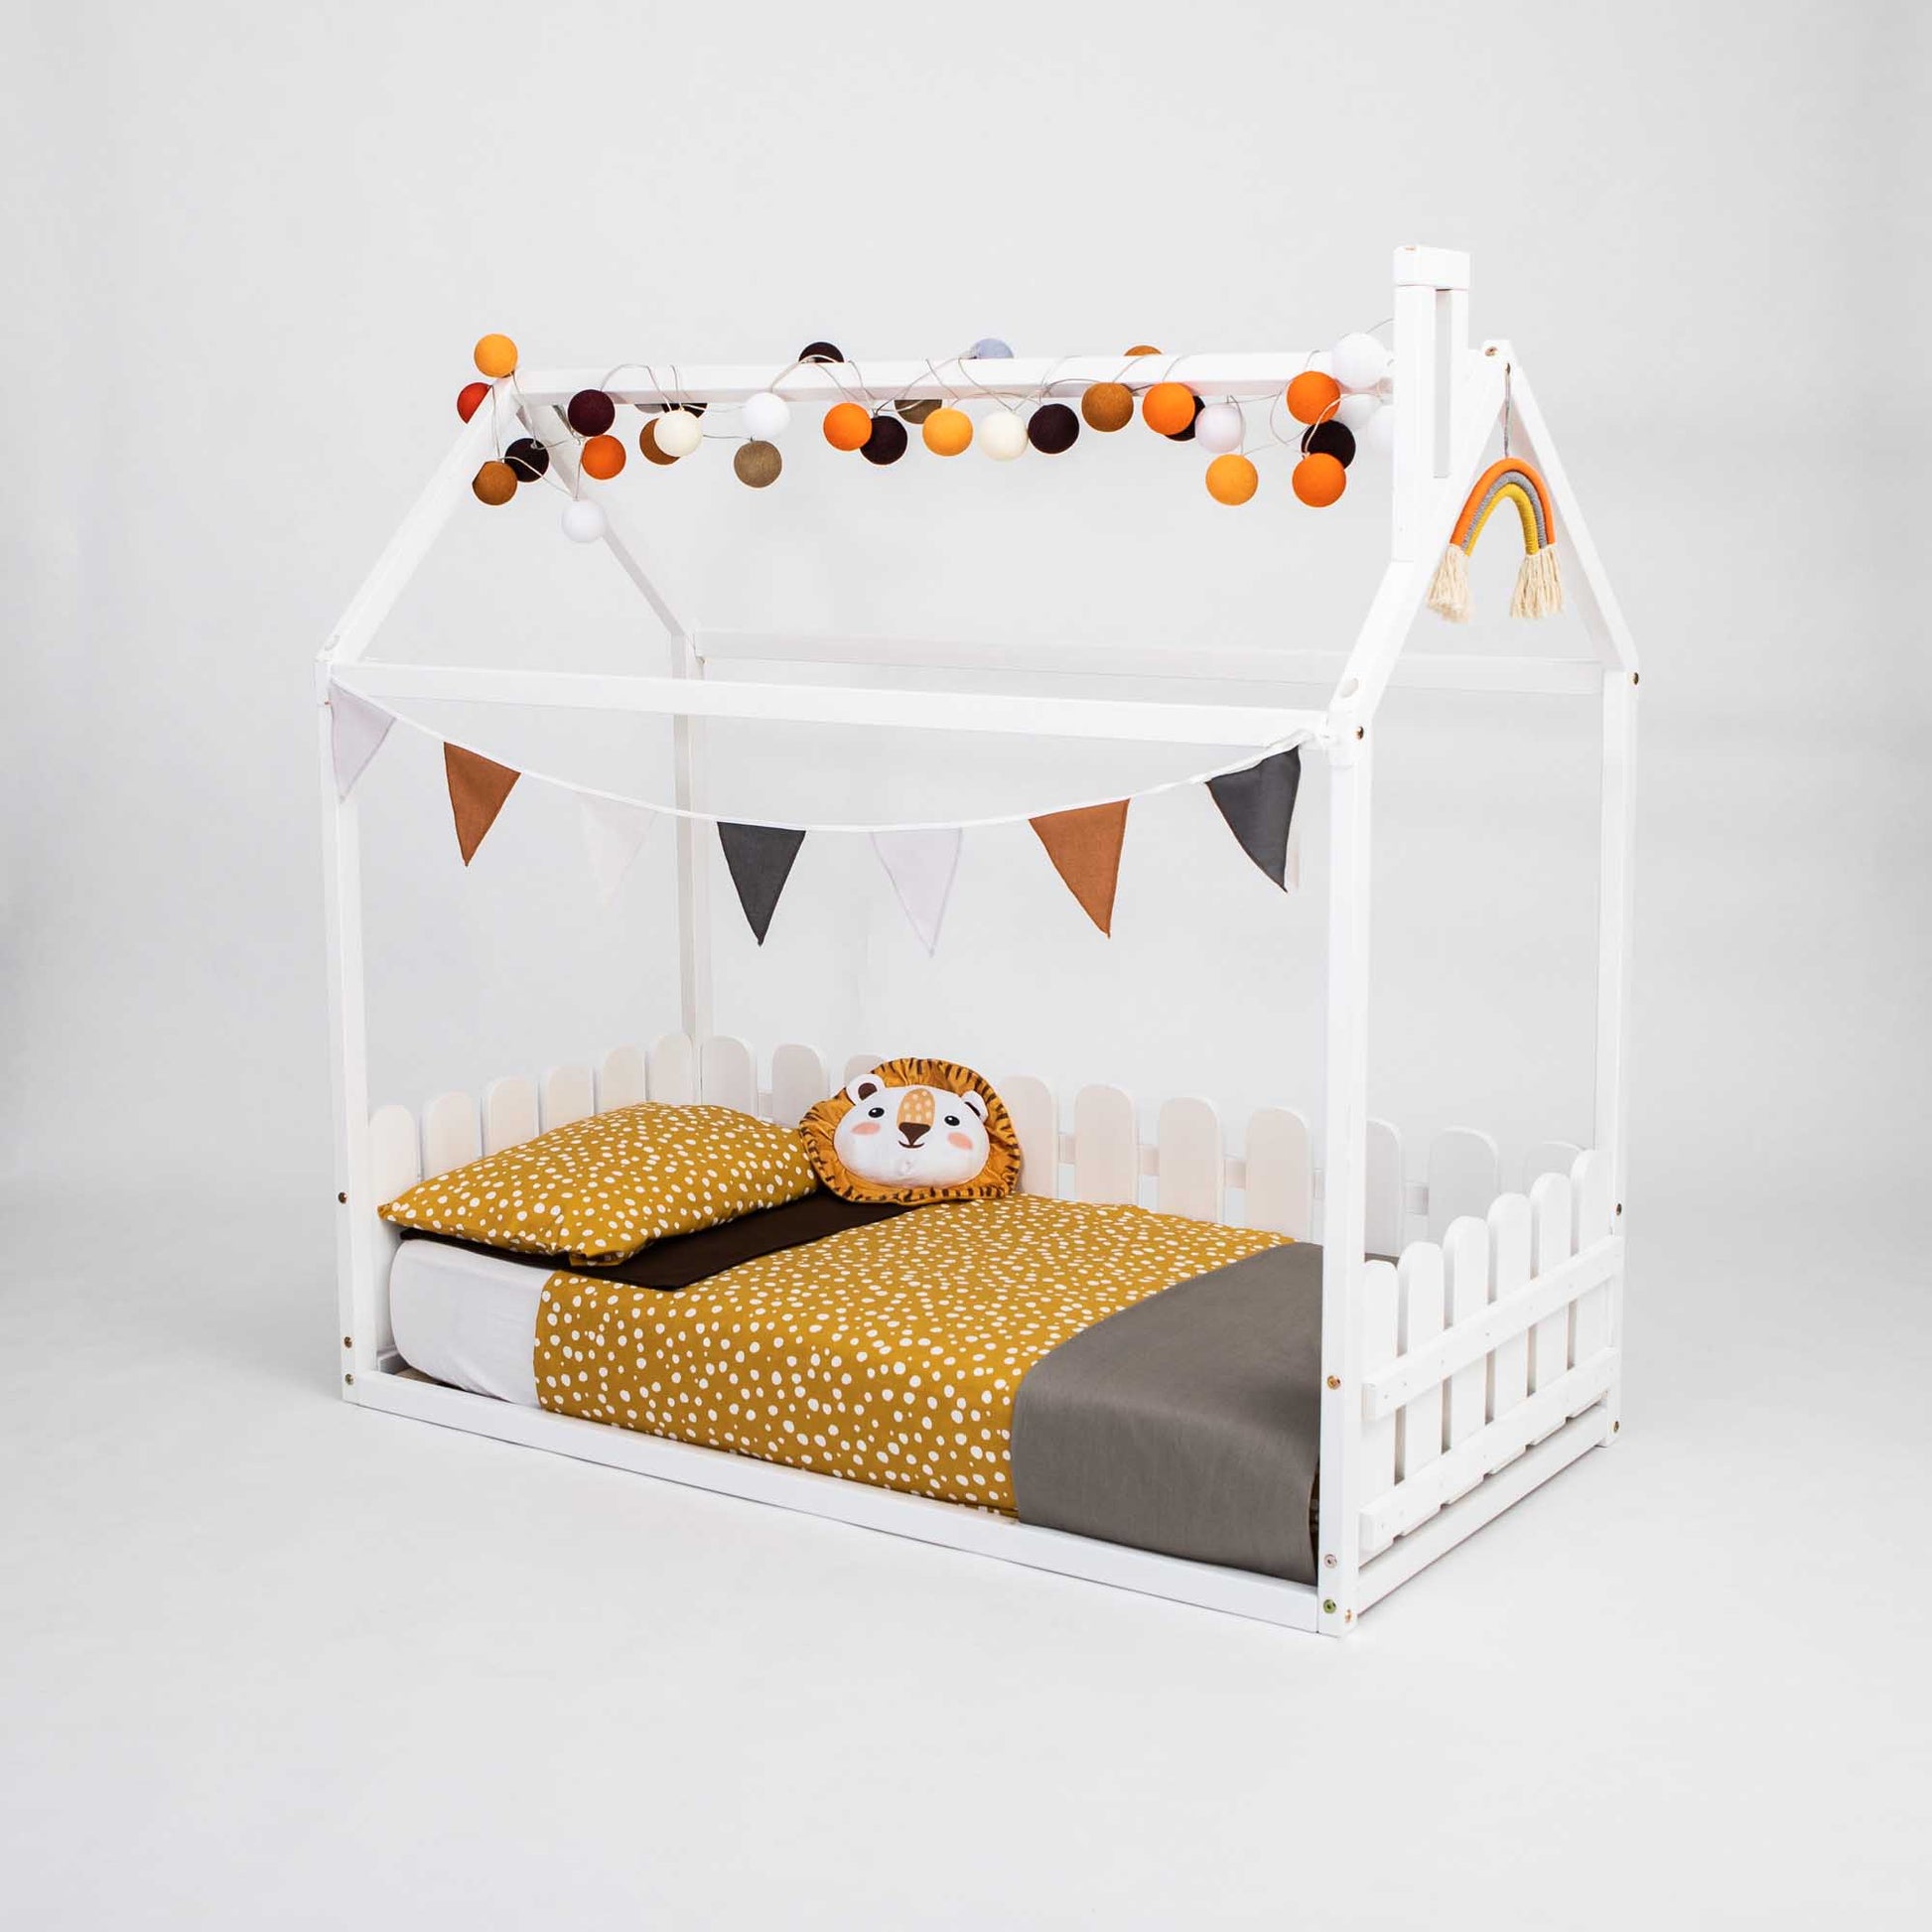 A floor house-frame bed with 3-sided picket fence rails adorned with a teddy bear and bunting.